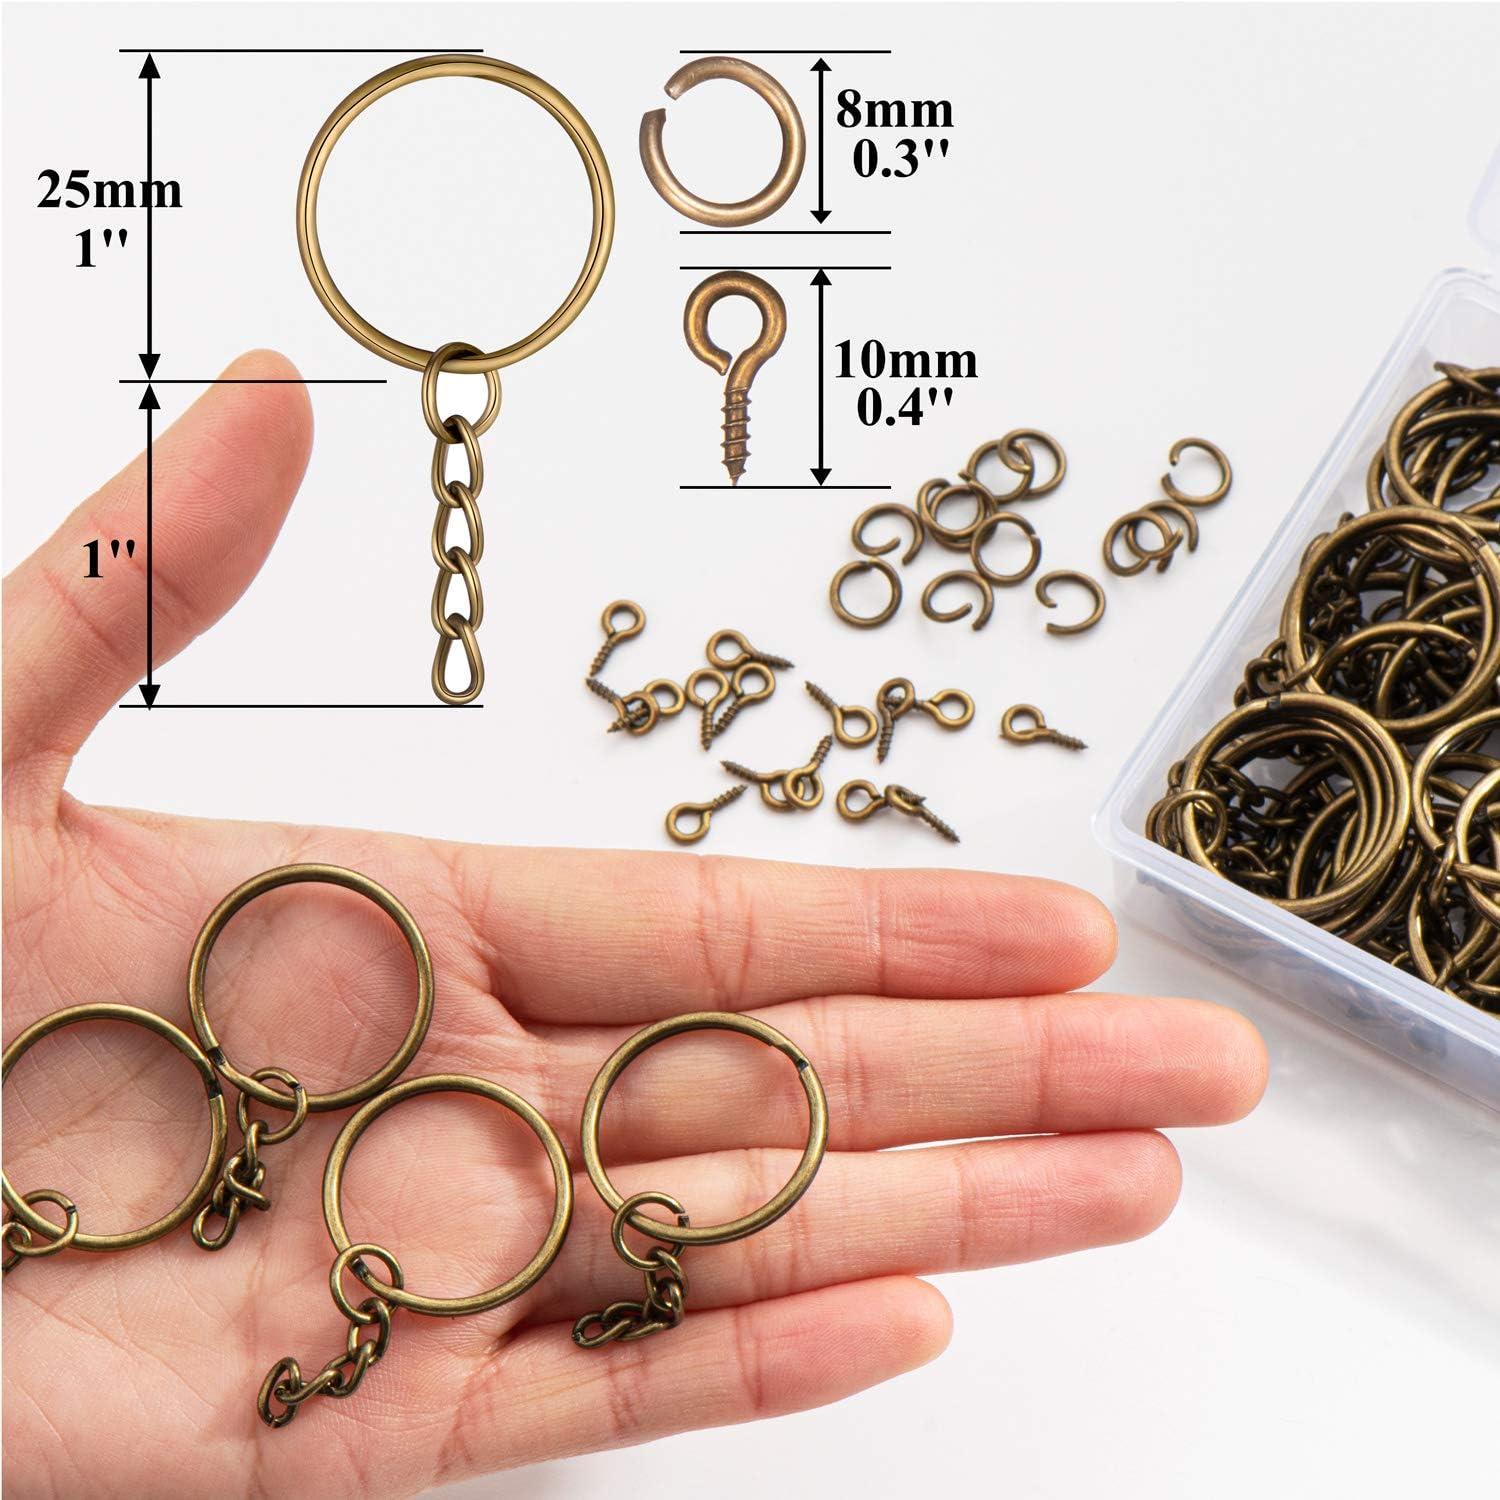 Key Chains Bulk,100Pcs Keychain Rings Metal Key Ring Gold Key Ring with  Chain 25mm Open Jump Ring for Crafts and Jewelry Making